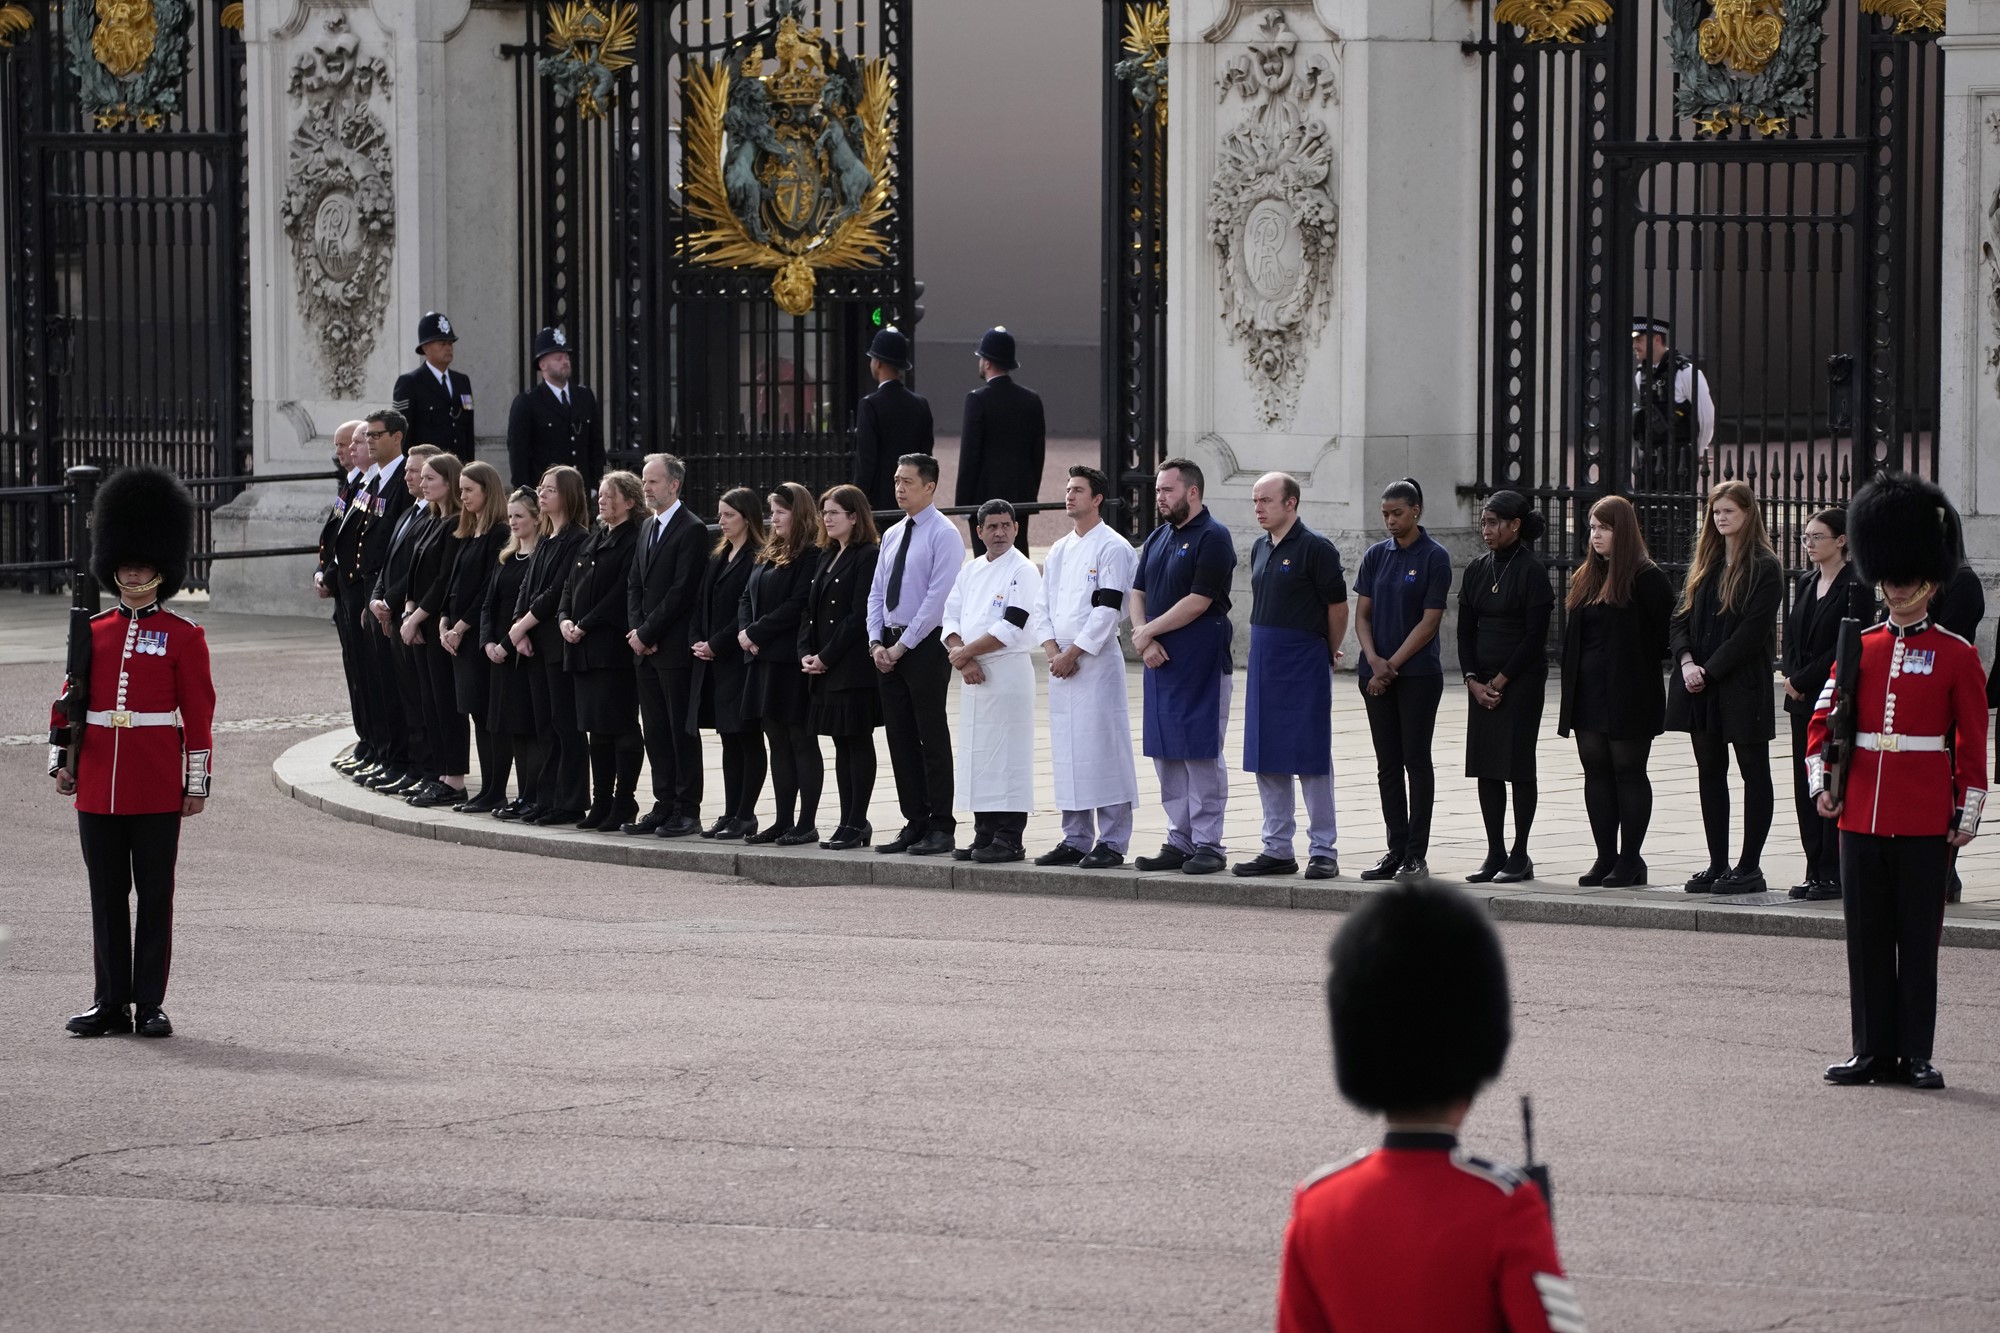 Royal staff members stand in a line on the street